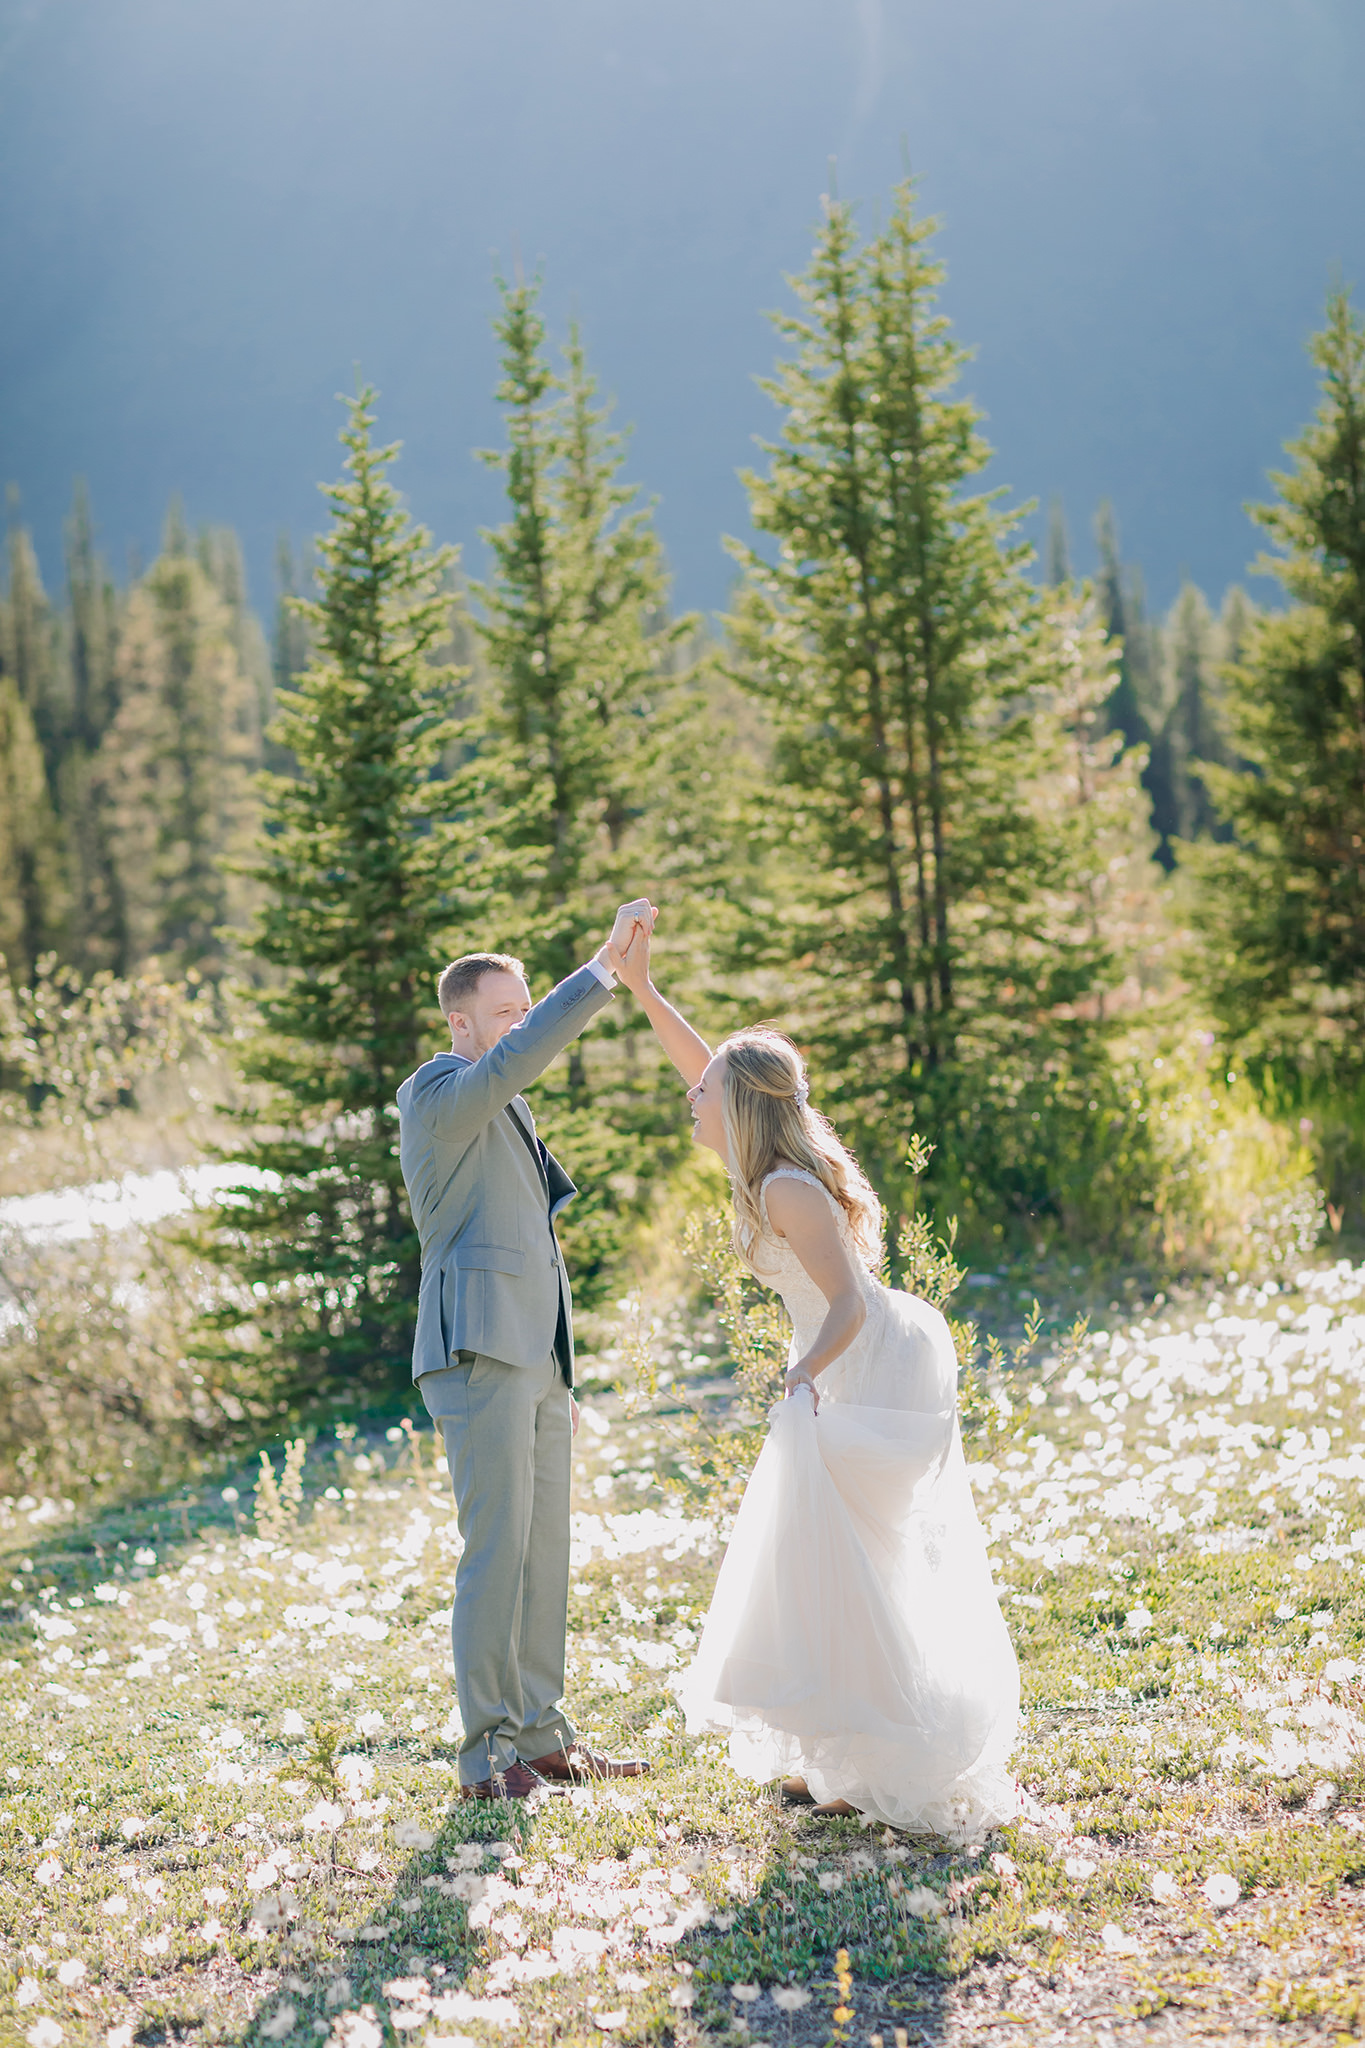 Exploring Icefields Parkway in Banff National Park on their wedding day. Summer mountain elopement at Silverhorn Creek photographed by local wedding & elopement photographer ENV Photography 